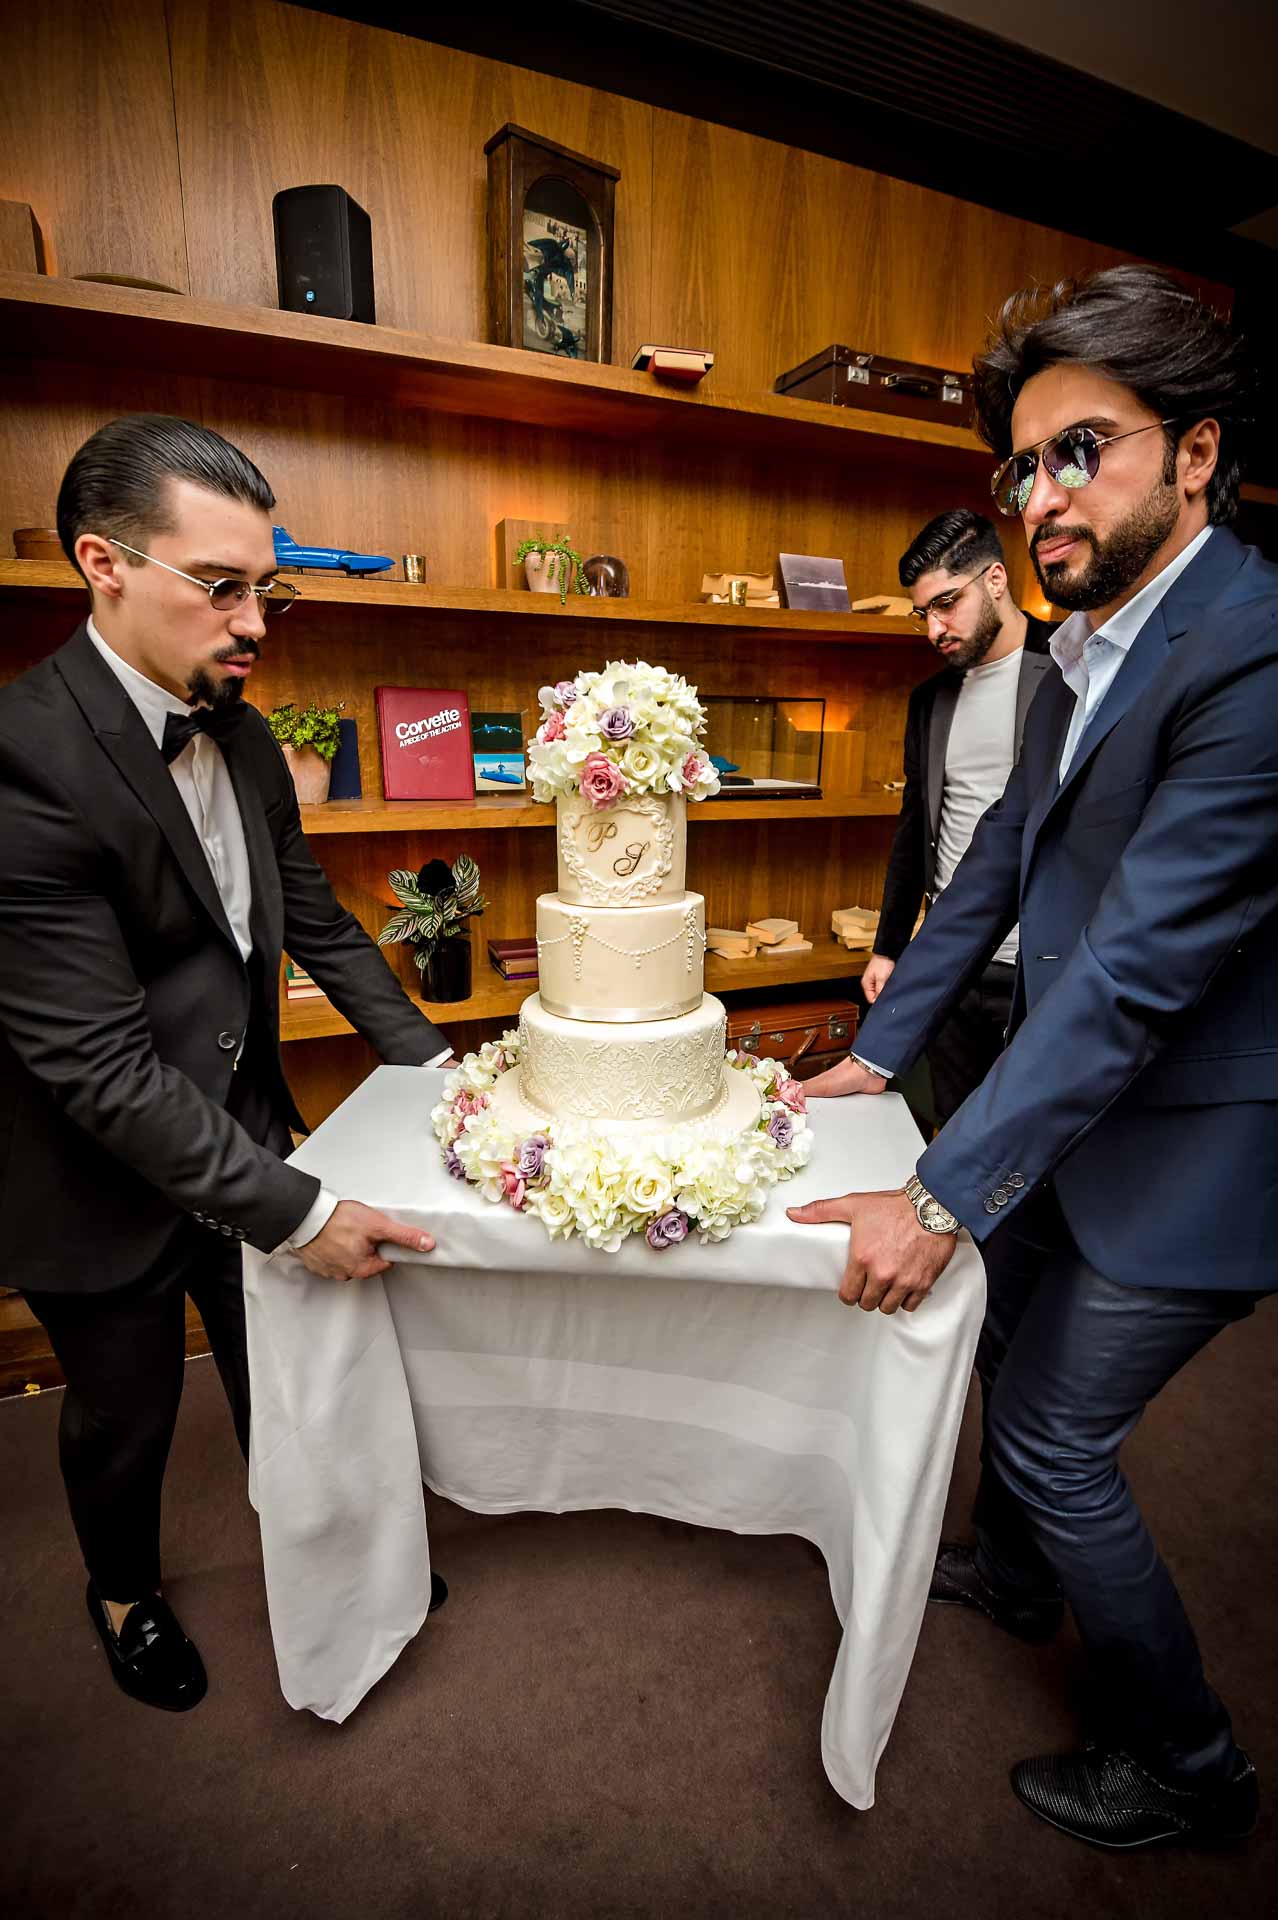 Groom and Best Man Carrying Wedding Cake